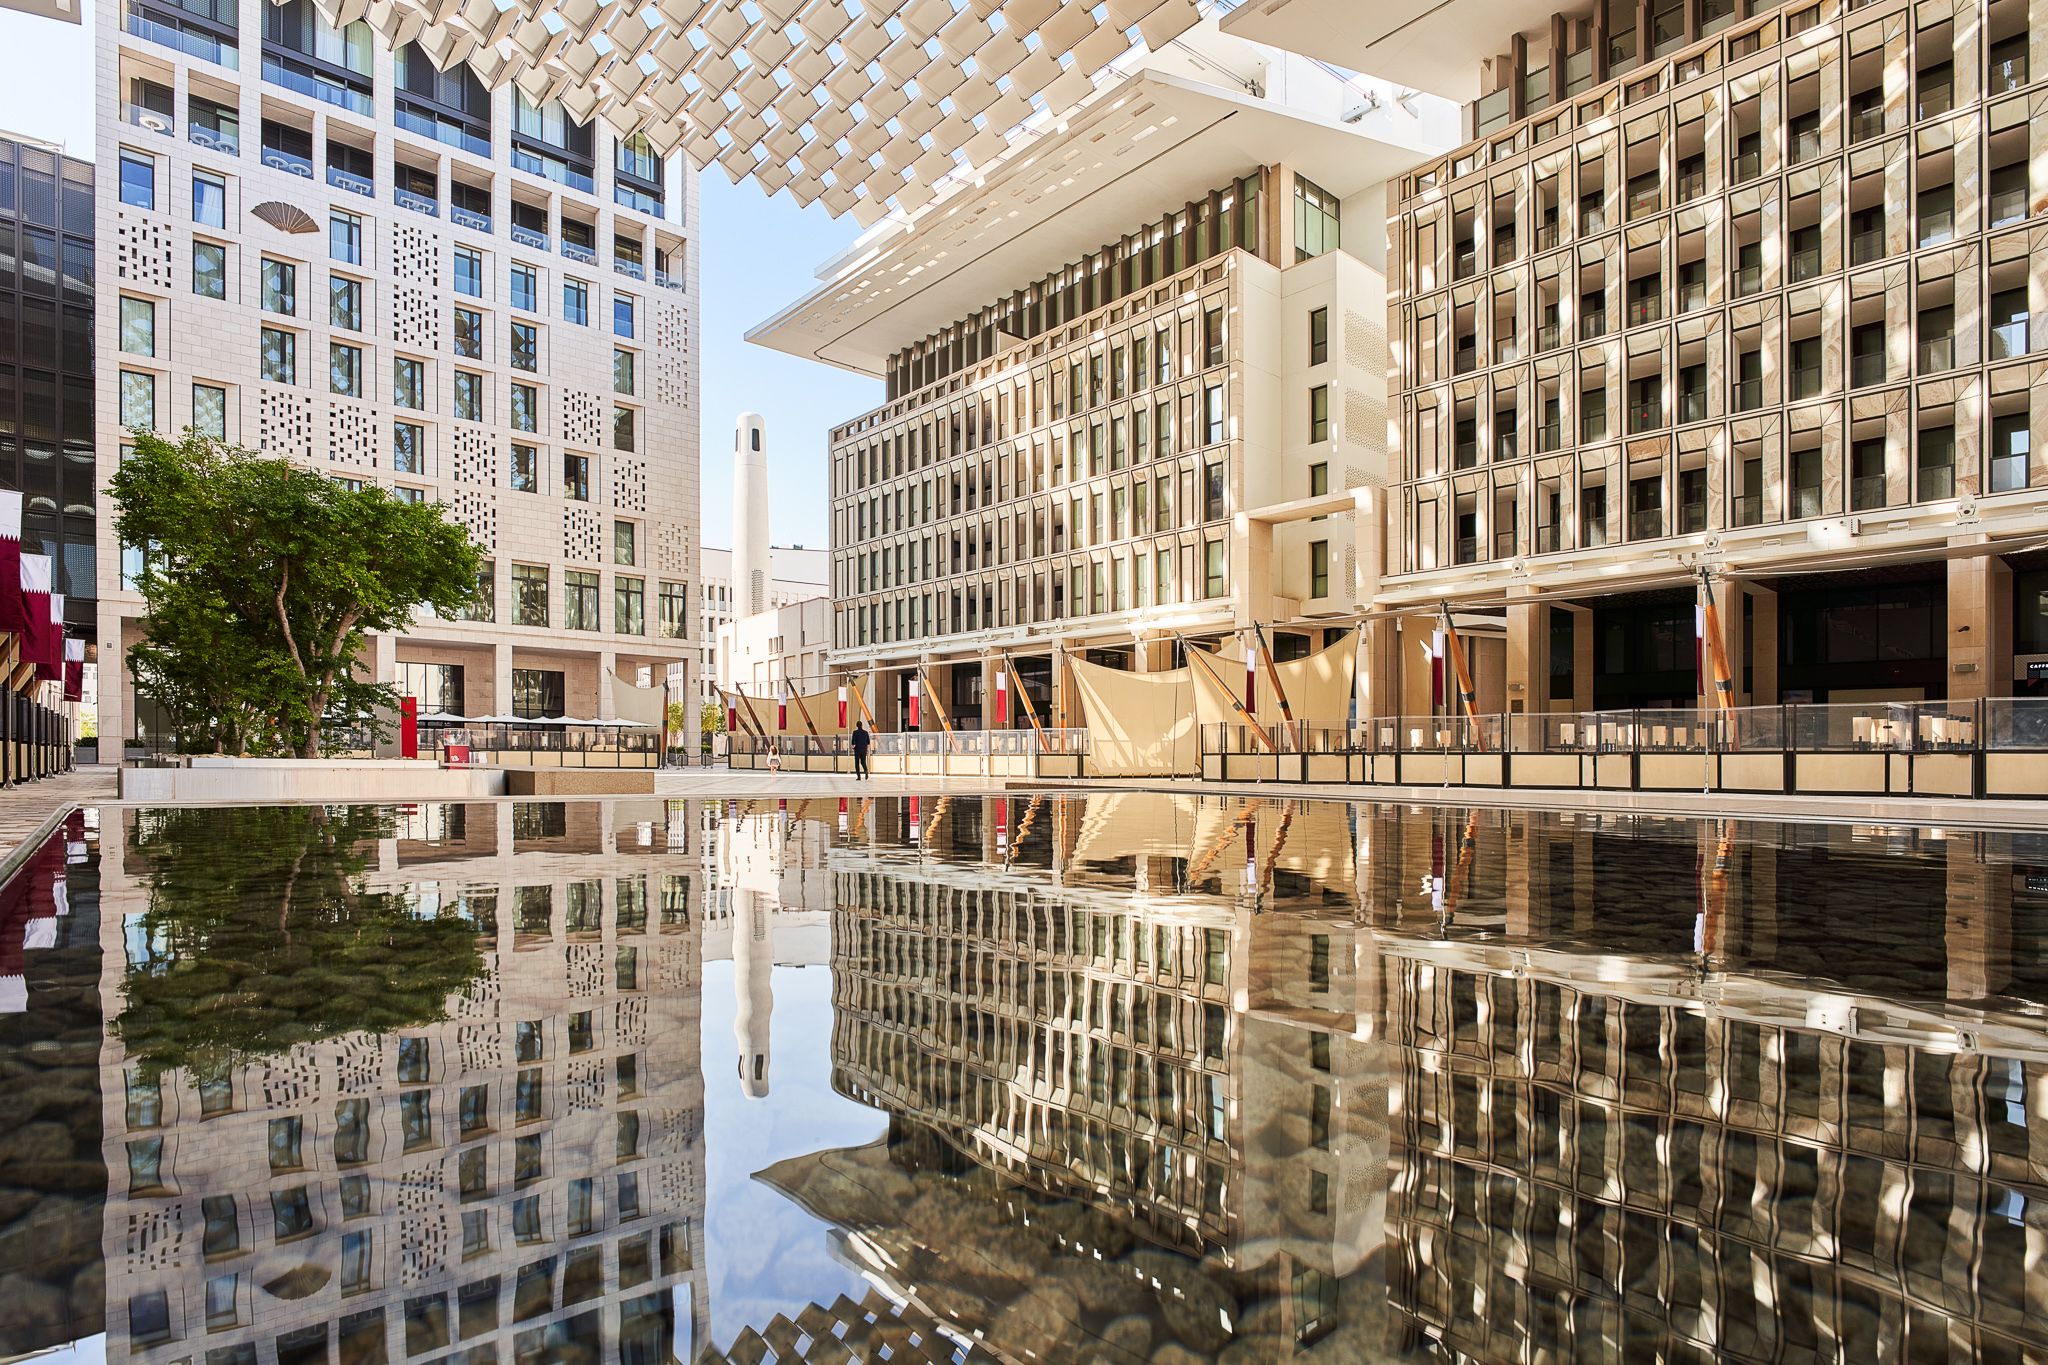 A courtyard. A reflecting pool in the foreground is surrounded by multi-storey buildings with modern architecture. Sun shades are suspended above the courtyard. A minaret is visible in a gap in the buildings in the far corner of the courtyard. Qatari flags hang from the fronts of the buildings. To the left of the reflective pool are a number of leafy trees in a planter. This is Barahat Msheireb.